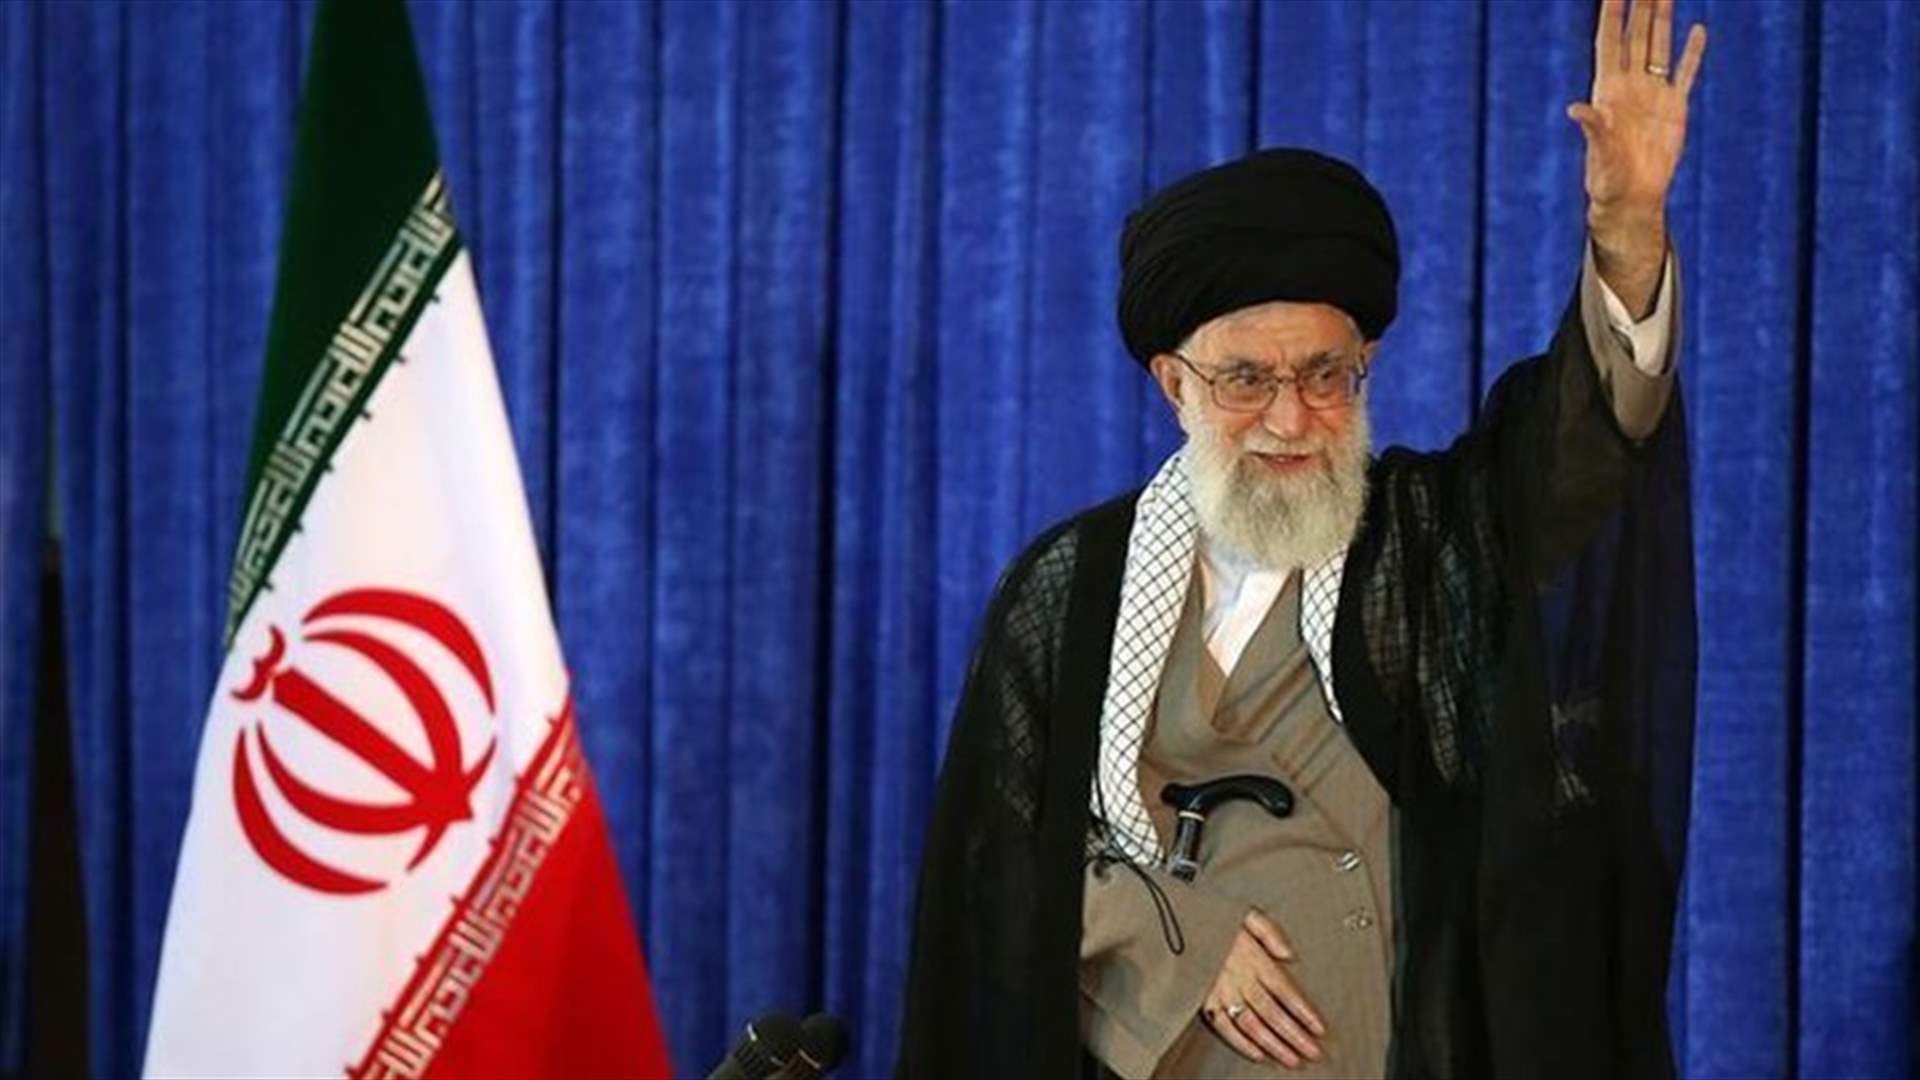 Iran leader urges polls transparency, rejects foreign meddling